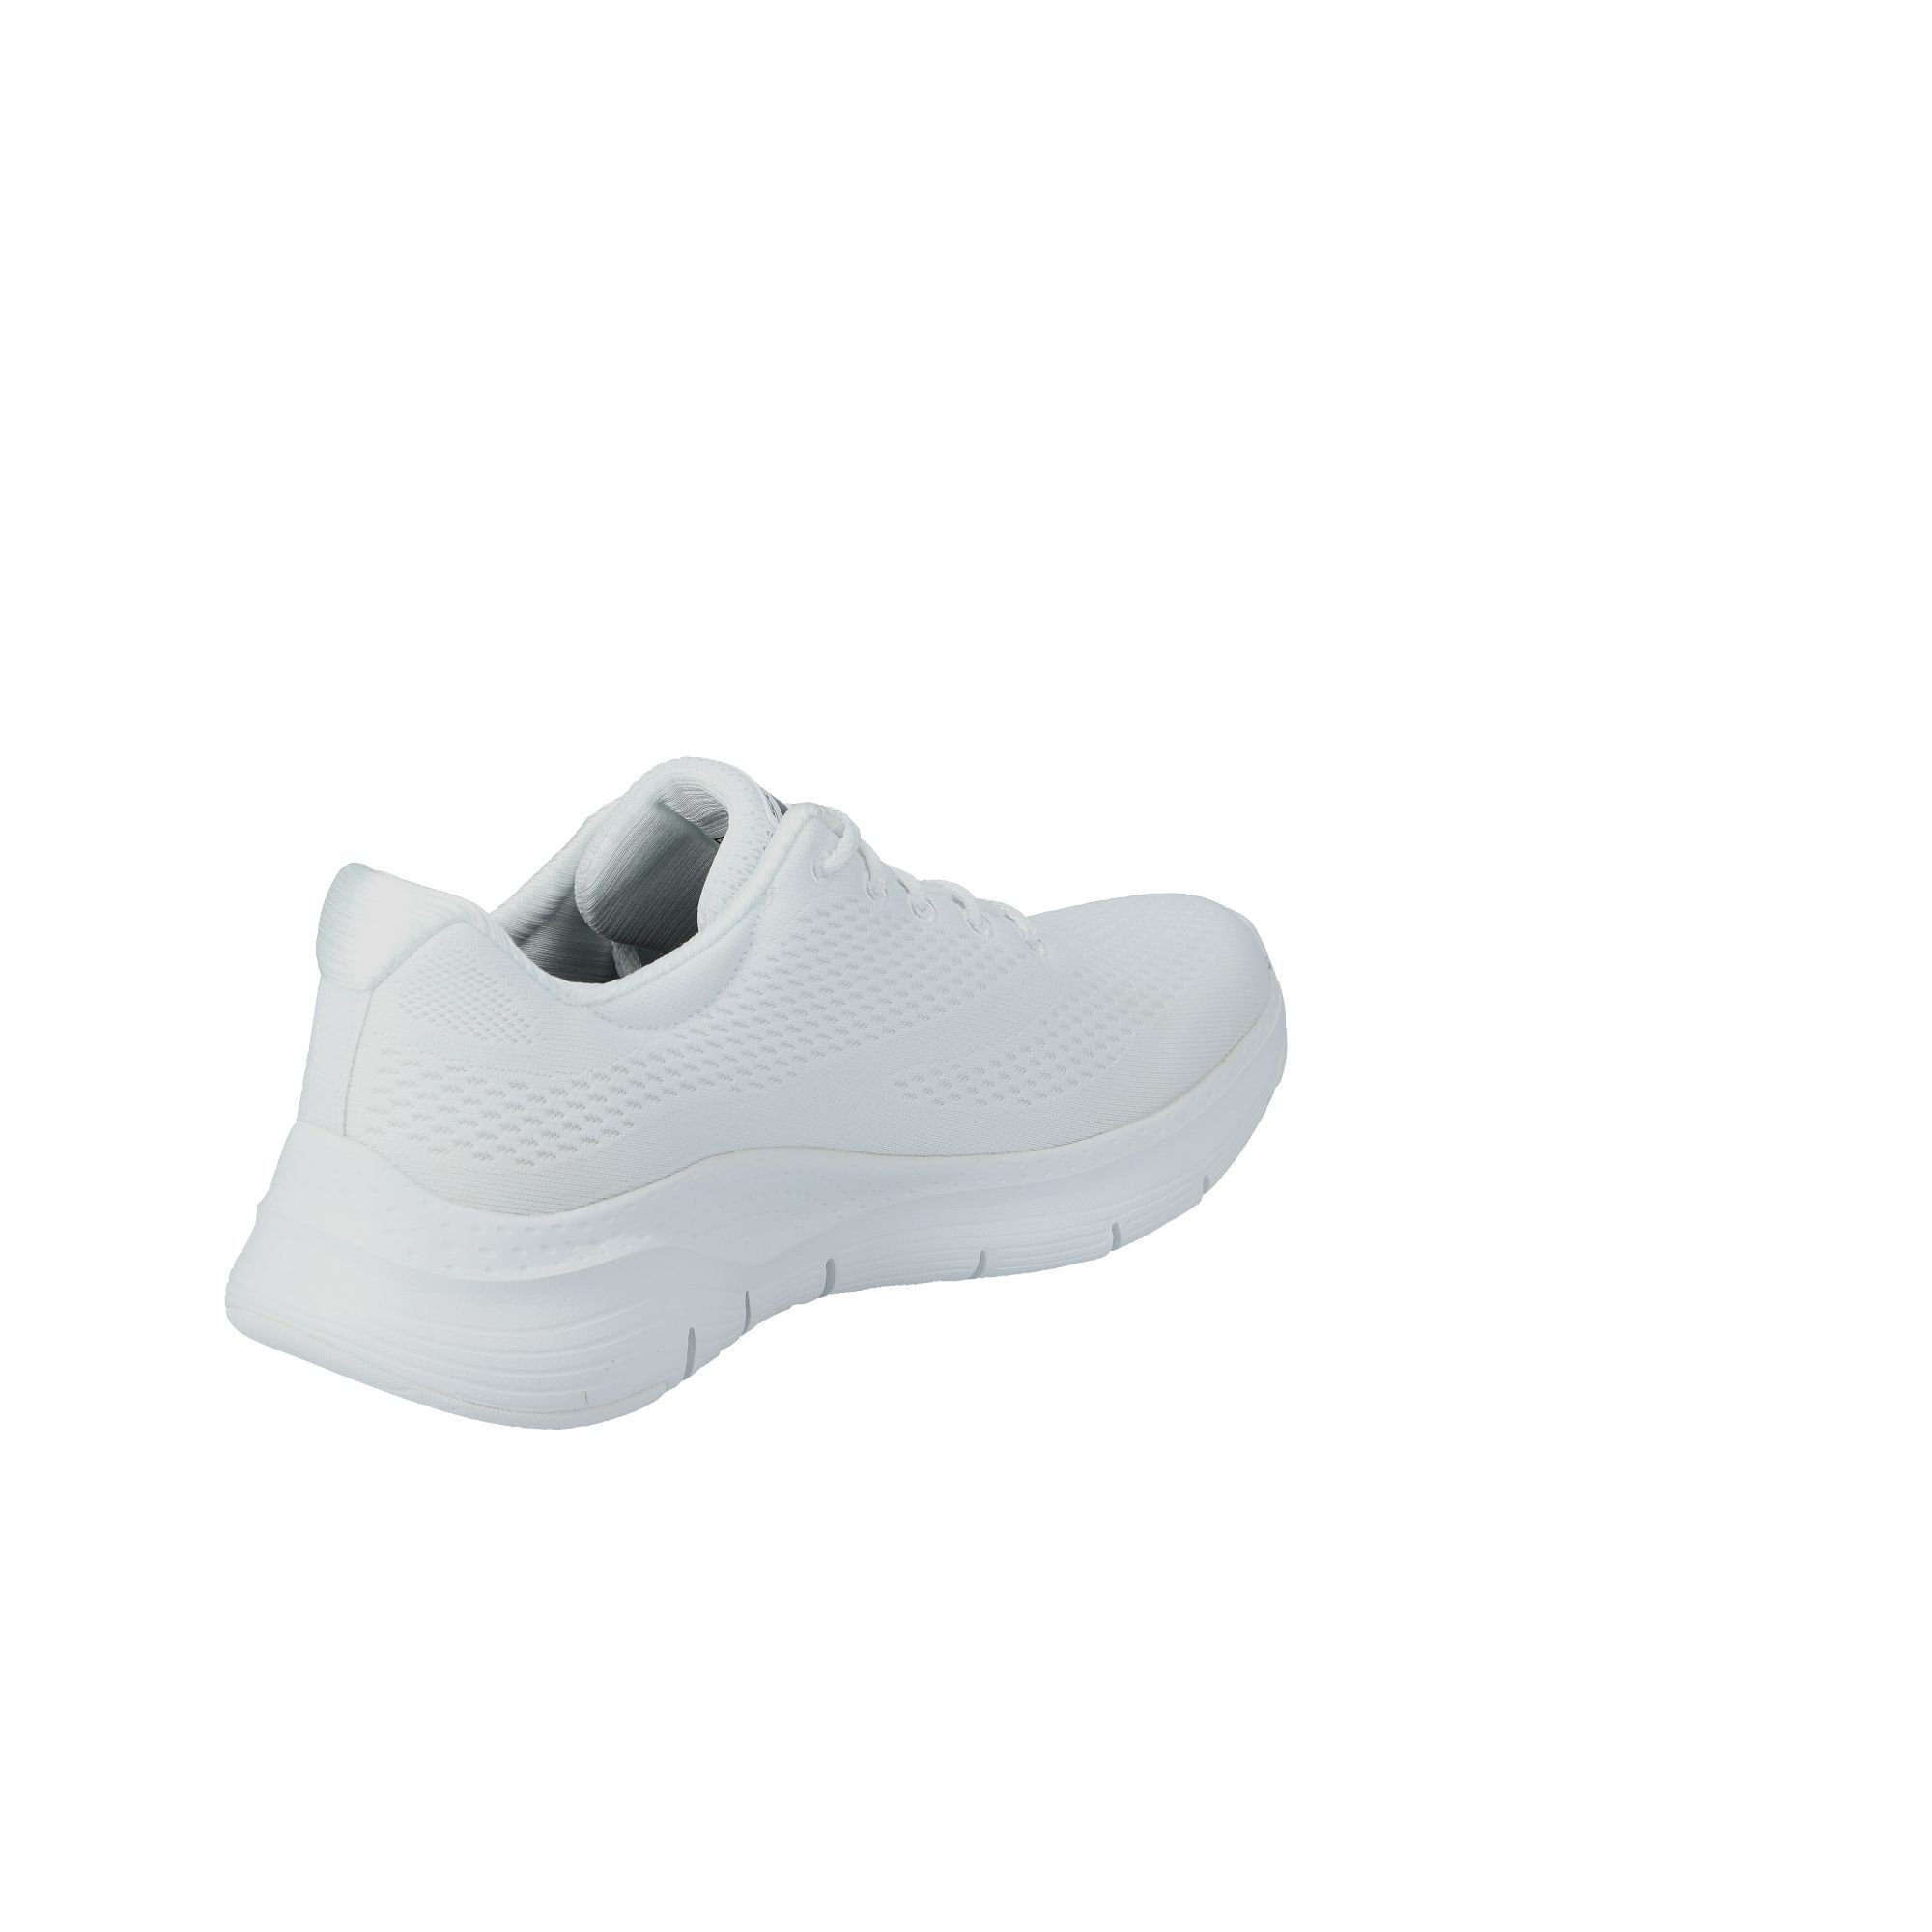 Skechers APPEAL SKECHERS BIG FIT - (2-tlg) white/navy/red ARCH Sneaker PERFORMANCE